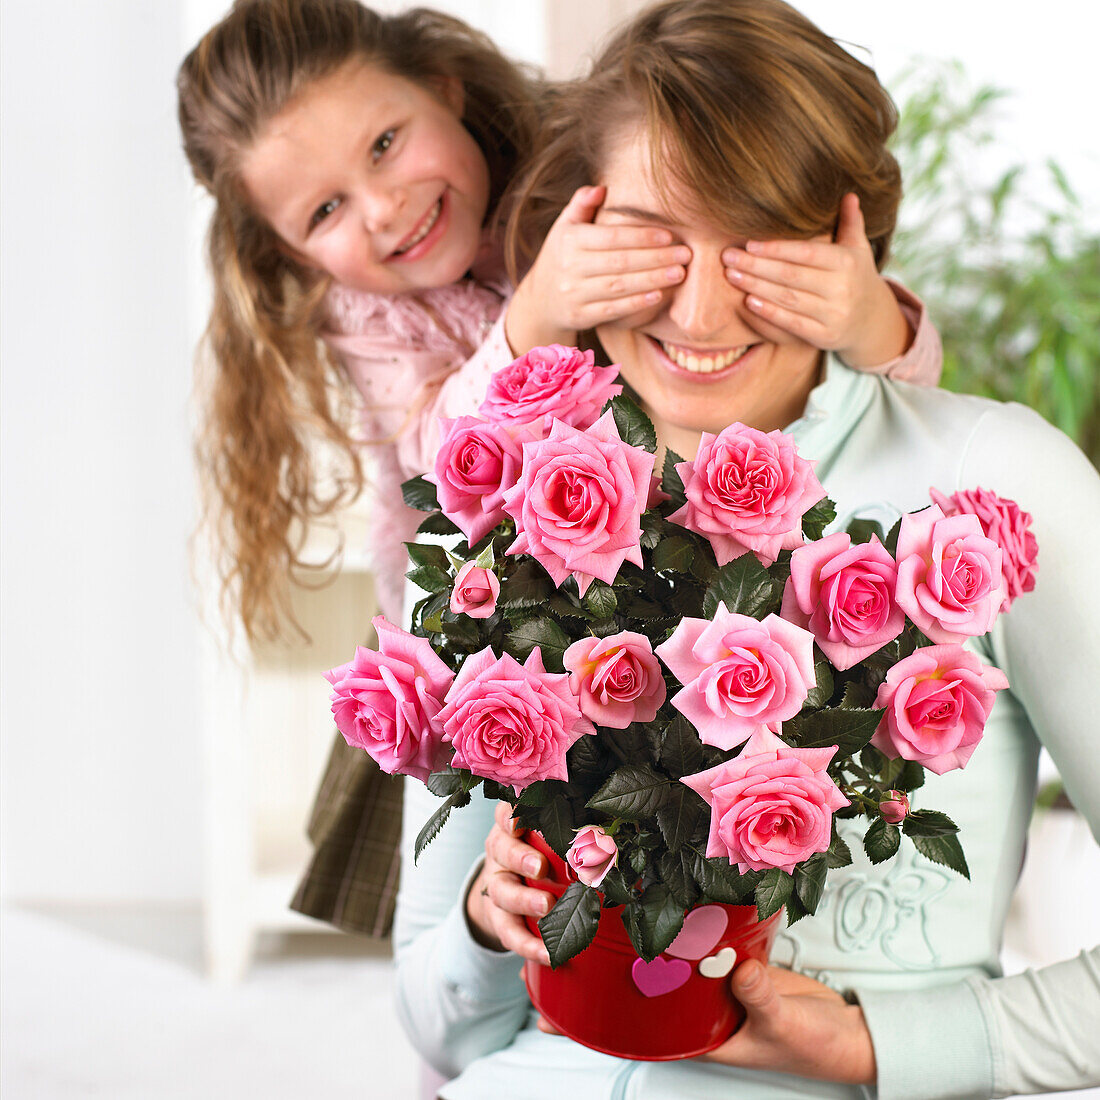 Girl surprises mother with bouquet of roses